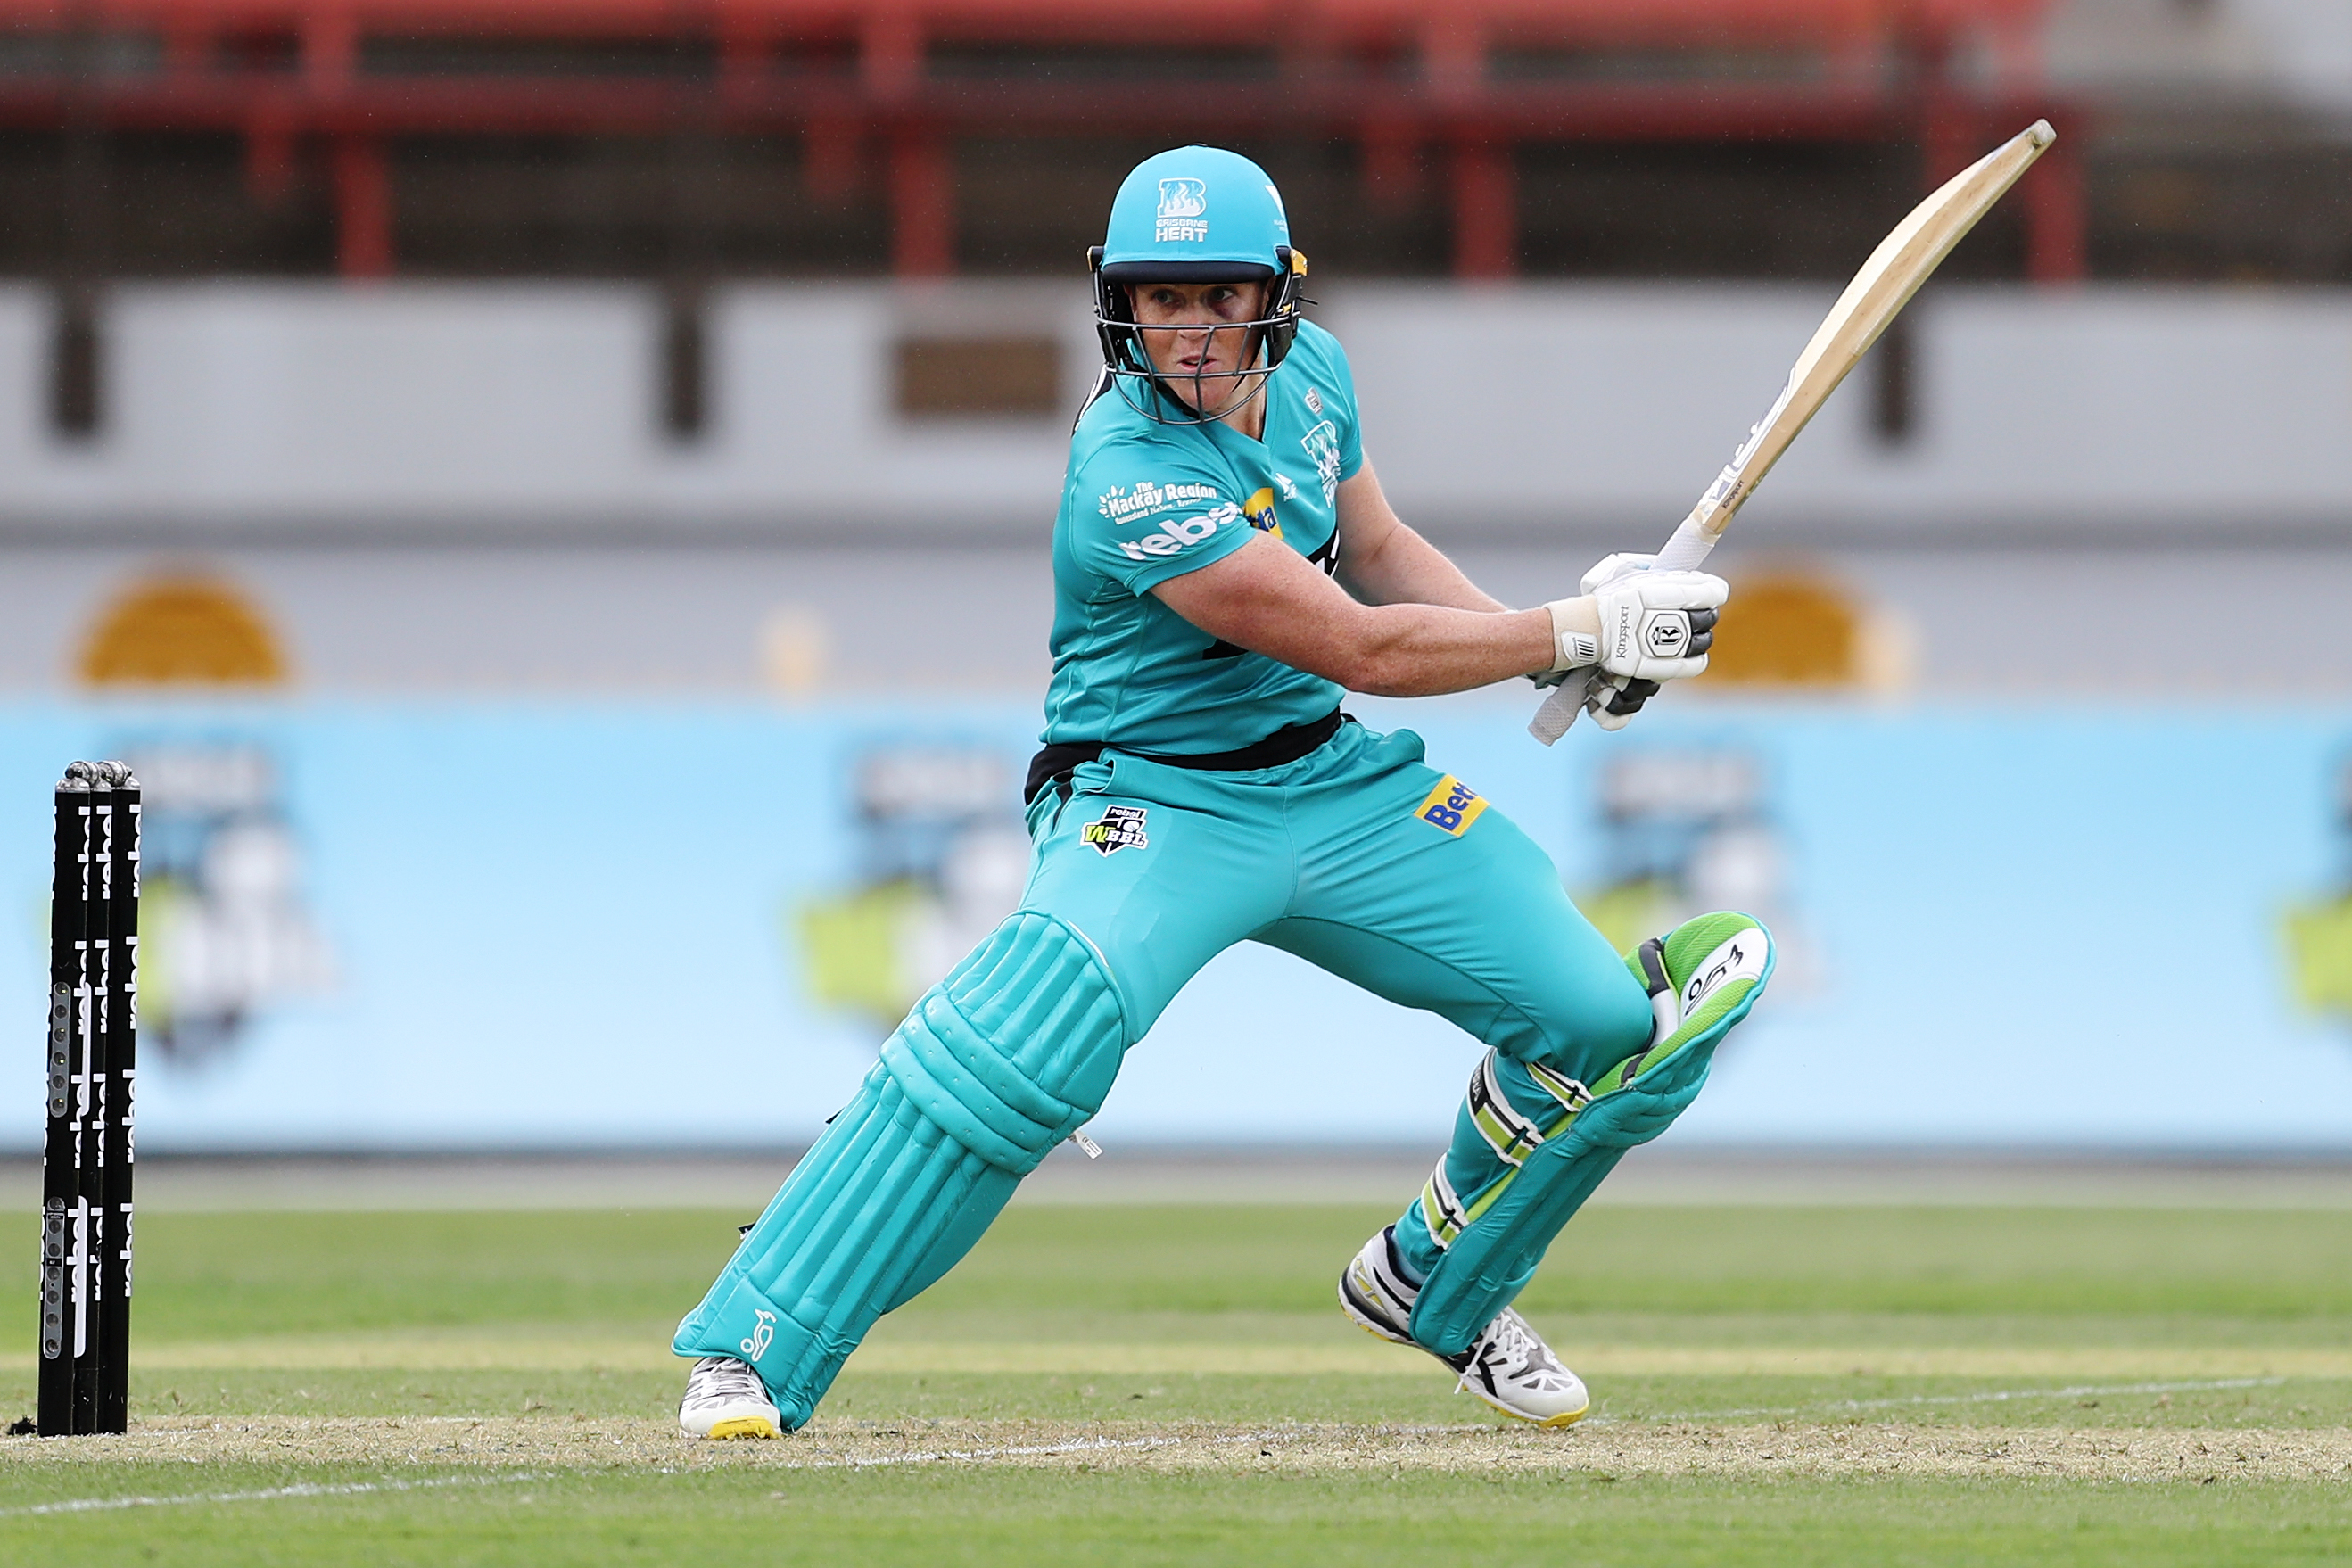 Have been watching a lot of MS Dhoni's innings, reveals Grace Harris